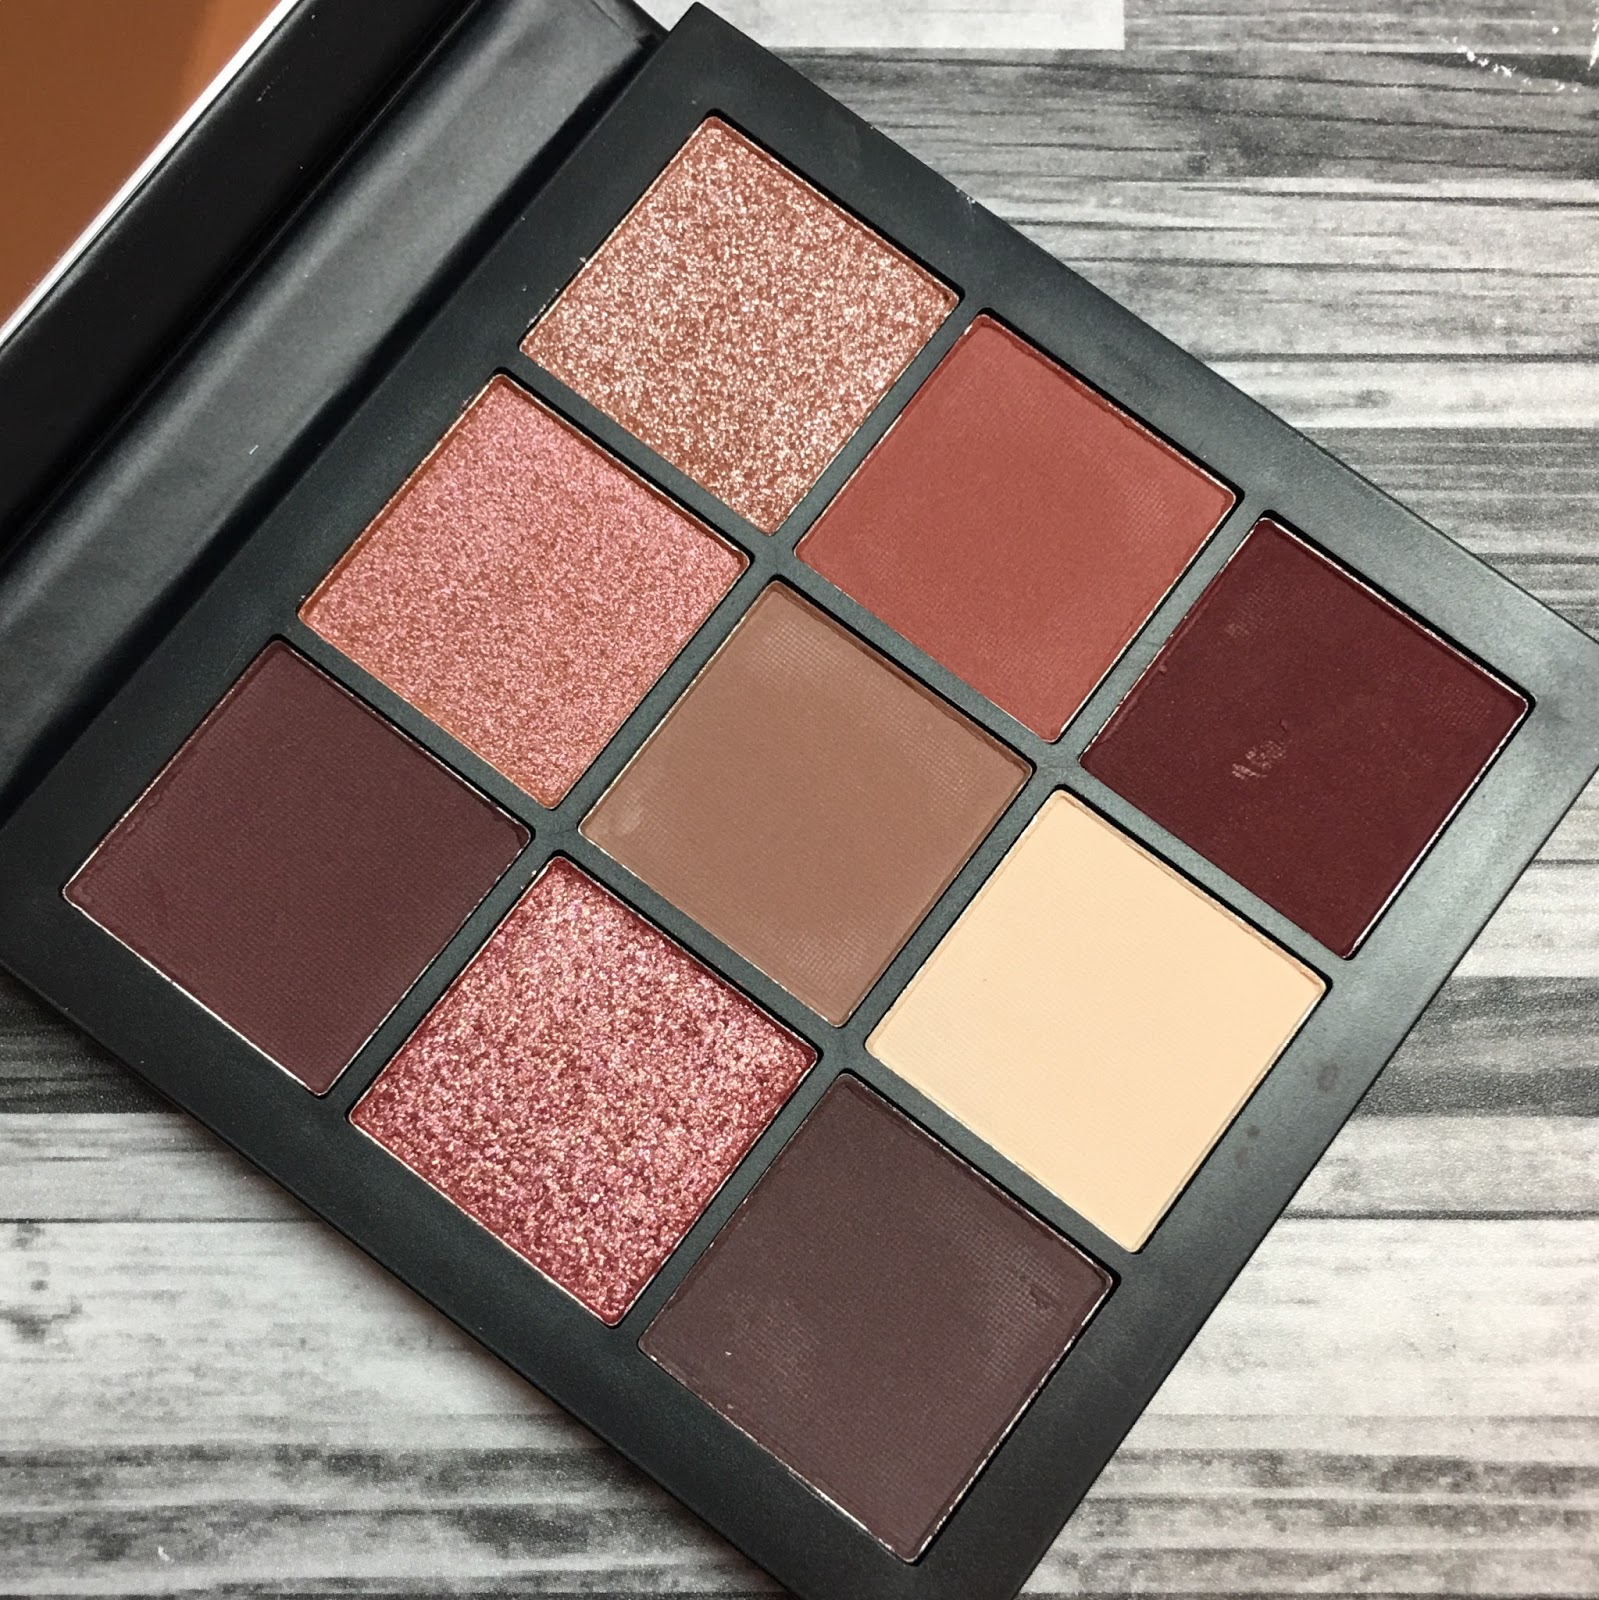 Huda Beauty Mauve Obsession Palette (Review and Swatches